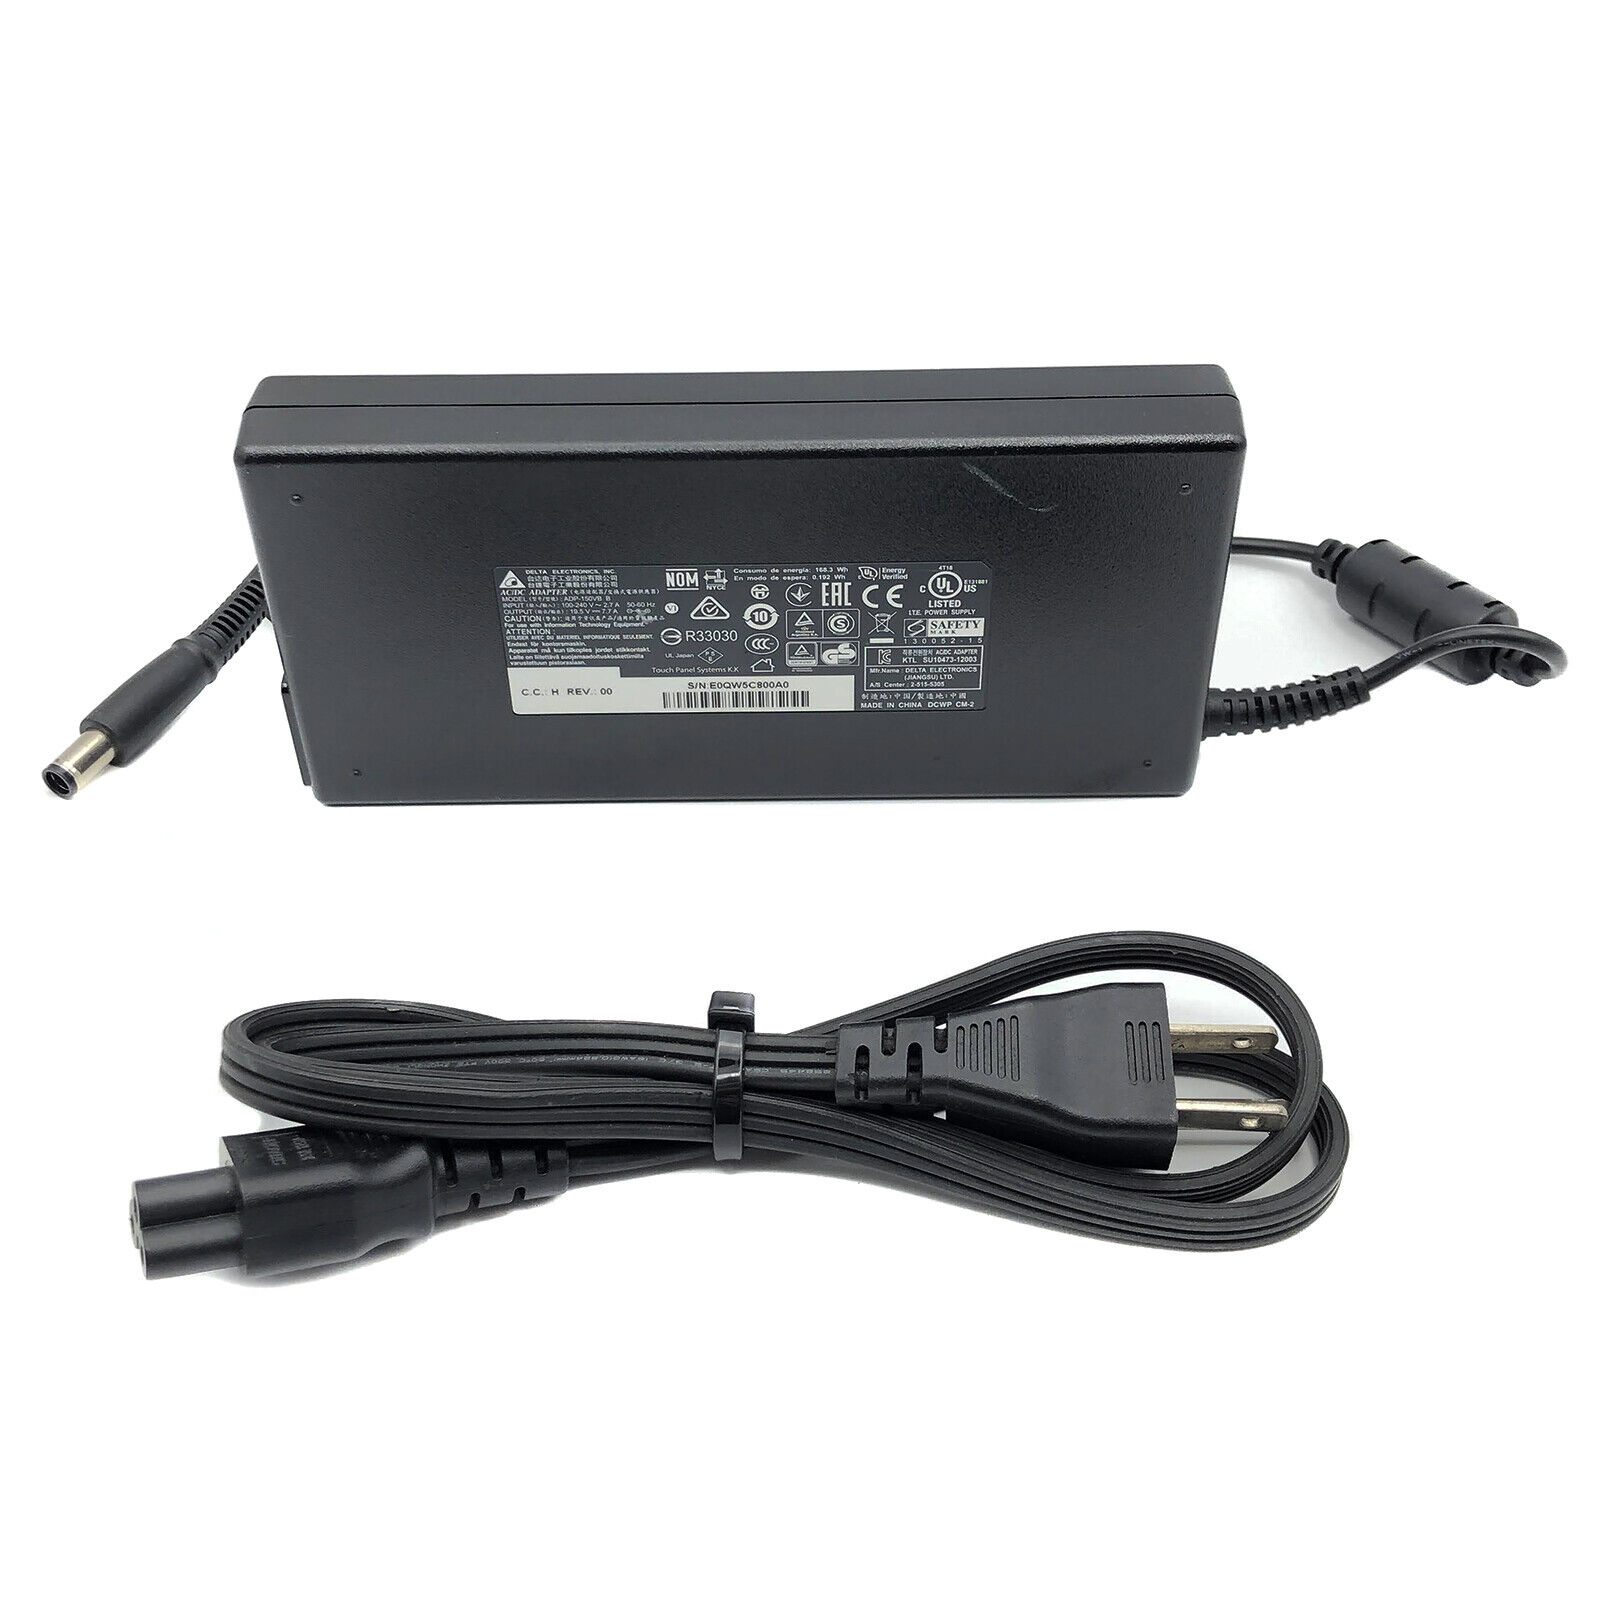 Genuine Delta Laptop Charger AC Adapter ADP-150VB B 150W 7.4mm No Pin w/Cord